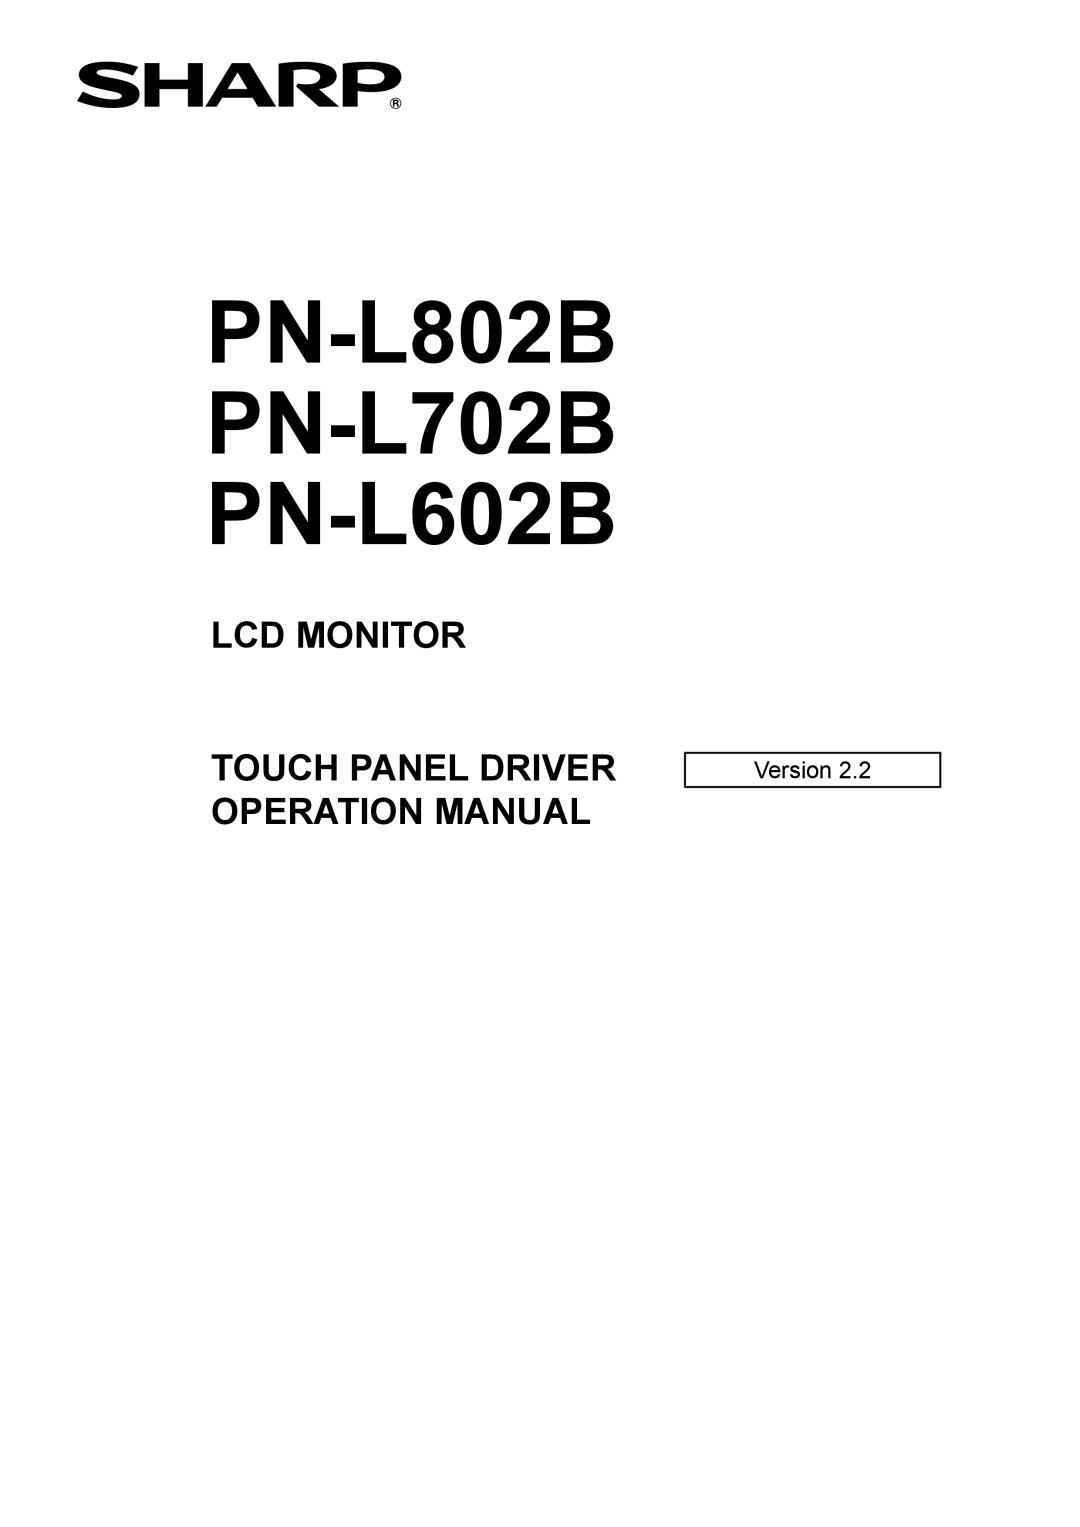 Sharp PN-L702B operation manual Lcd Monitor, Touch Panel Driver Operation Manual, Version 